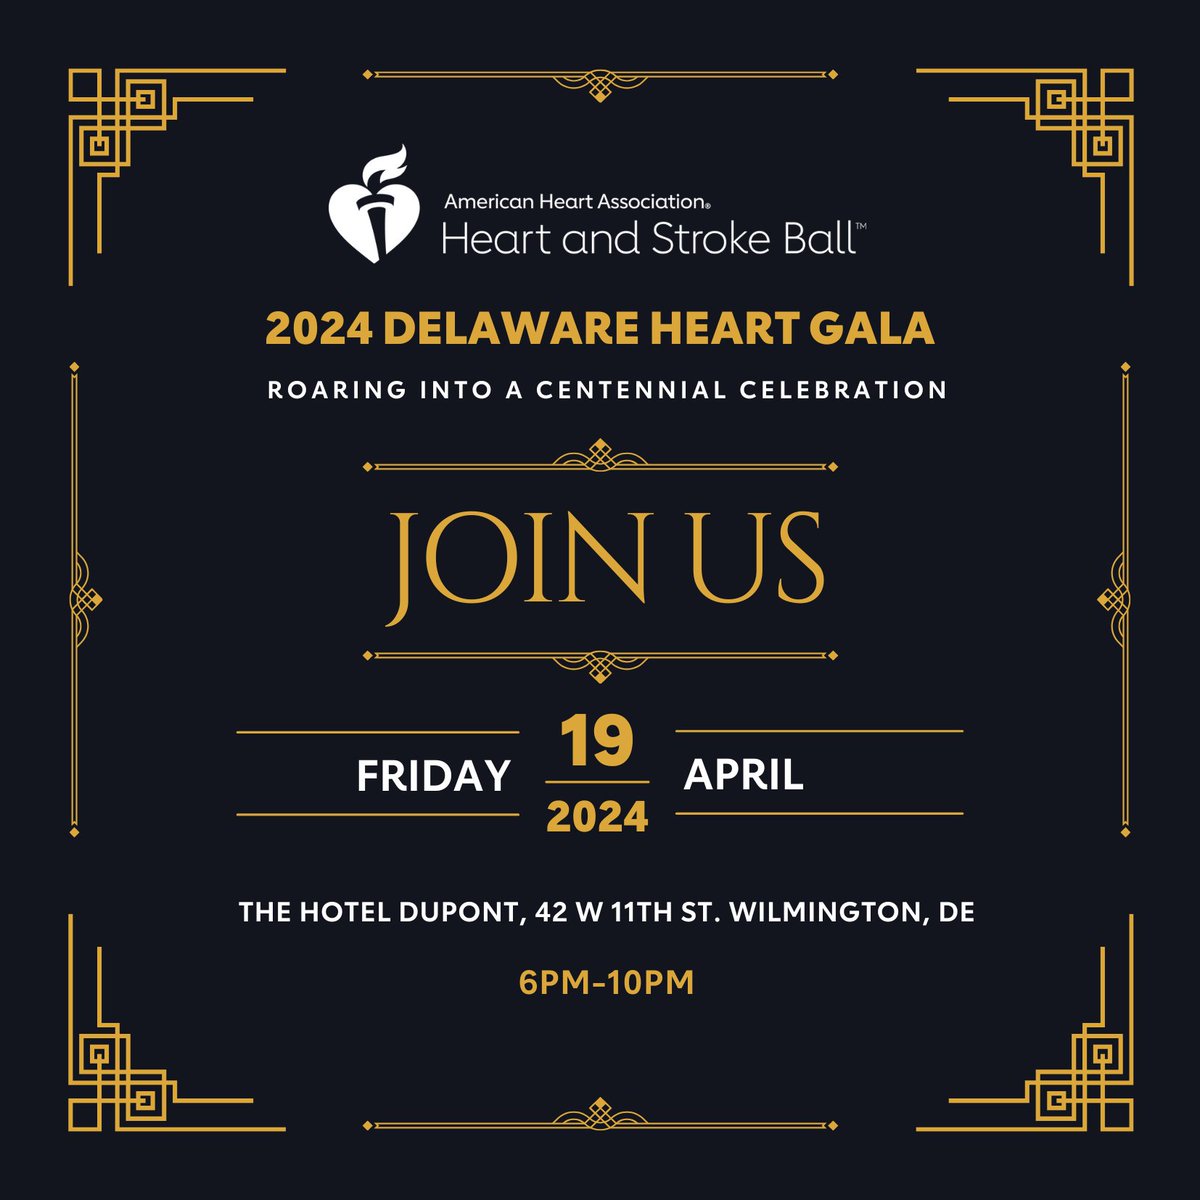 The countdown is on! The 2024 Delaware Heart & Stroke Ball is less than a month away! Take a trip back in time to the roaring 1920s to celebrate the 100th anniversary of the American Heart Association. This is a night you don't want to miss! Visit: spr.ly/6015kxLaW